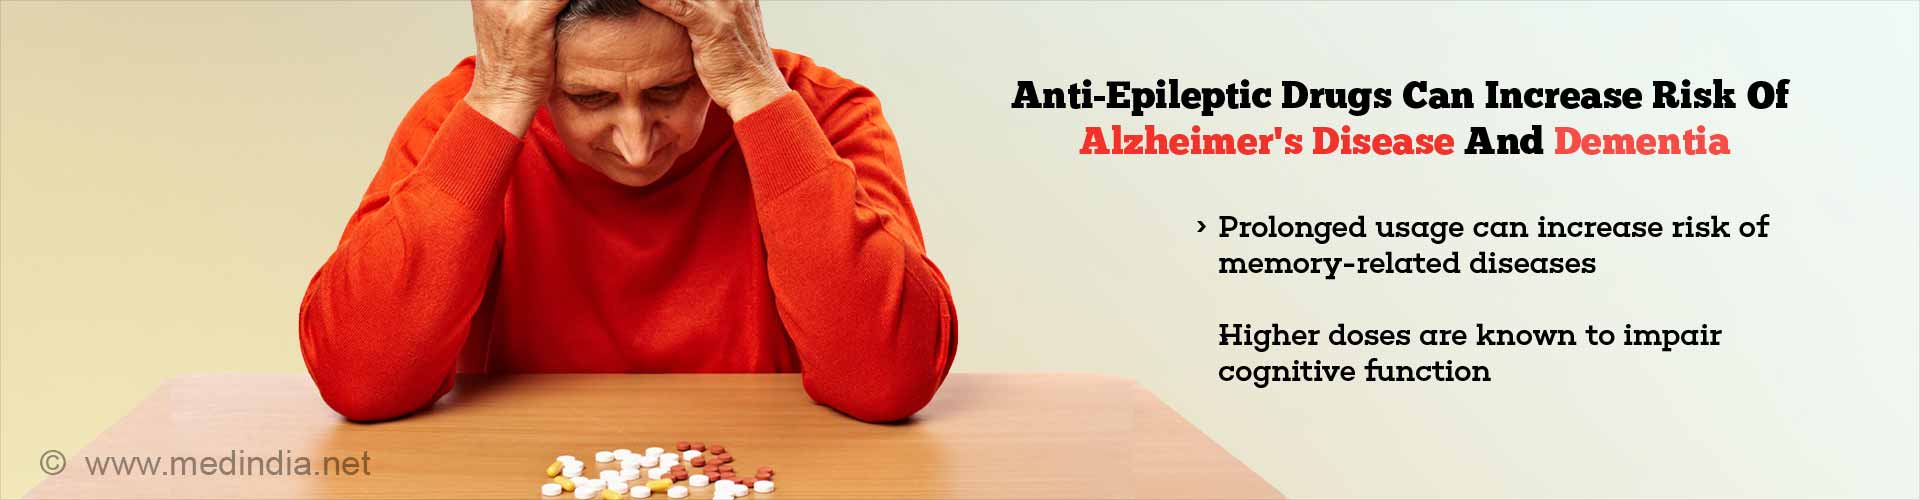 anti-epileptic drugs can increase risk of alzheimer's disease and dementia
- prolonged usage can increase risk of memory-related diseases
- higher doses are known to impair cognitive function